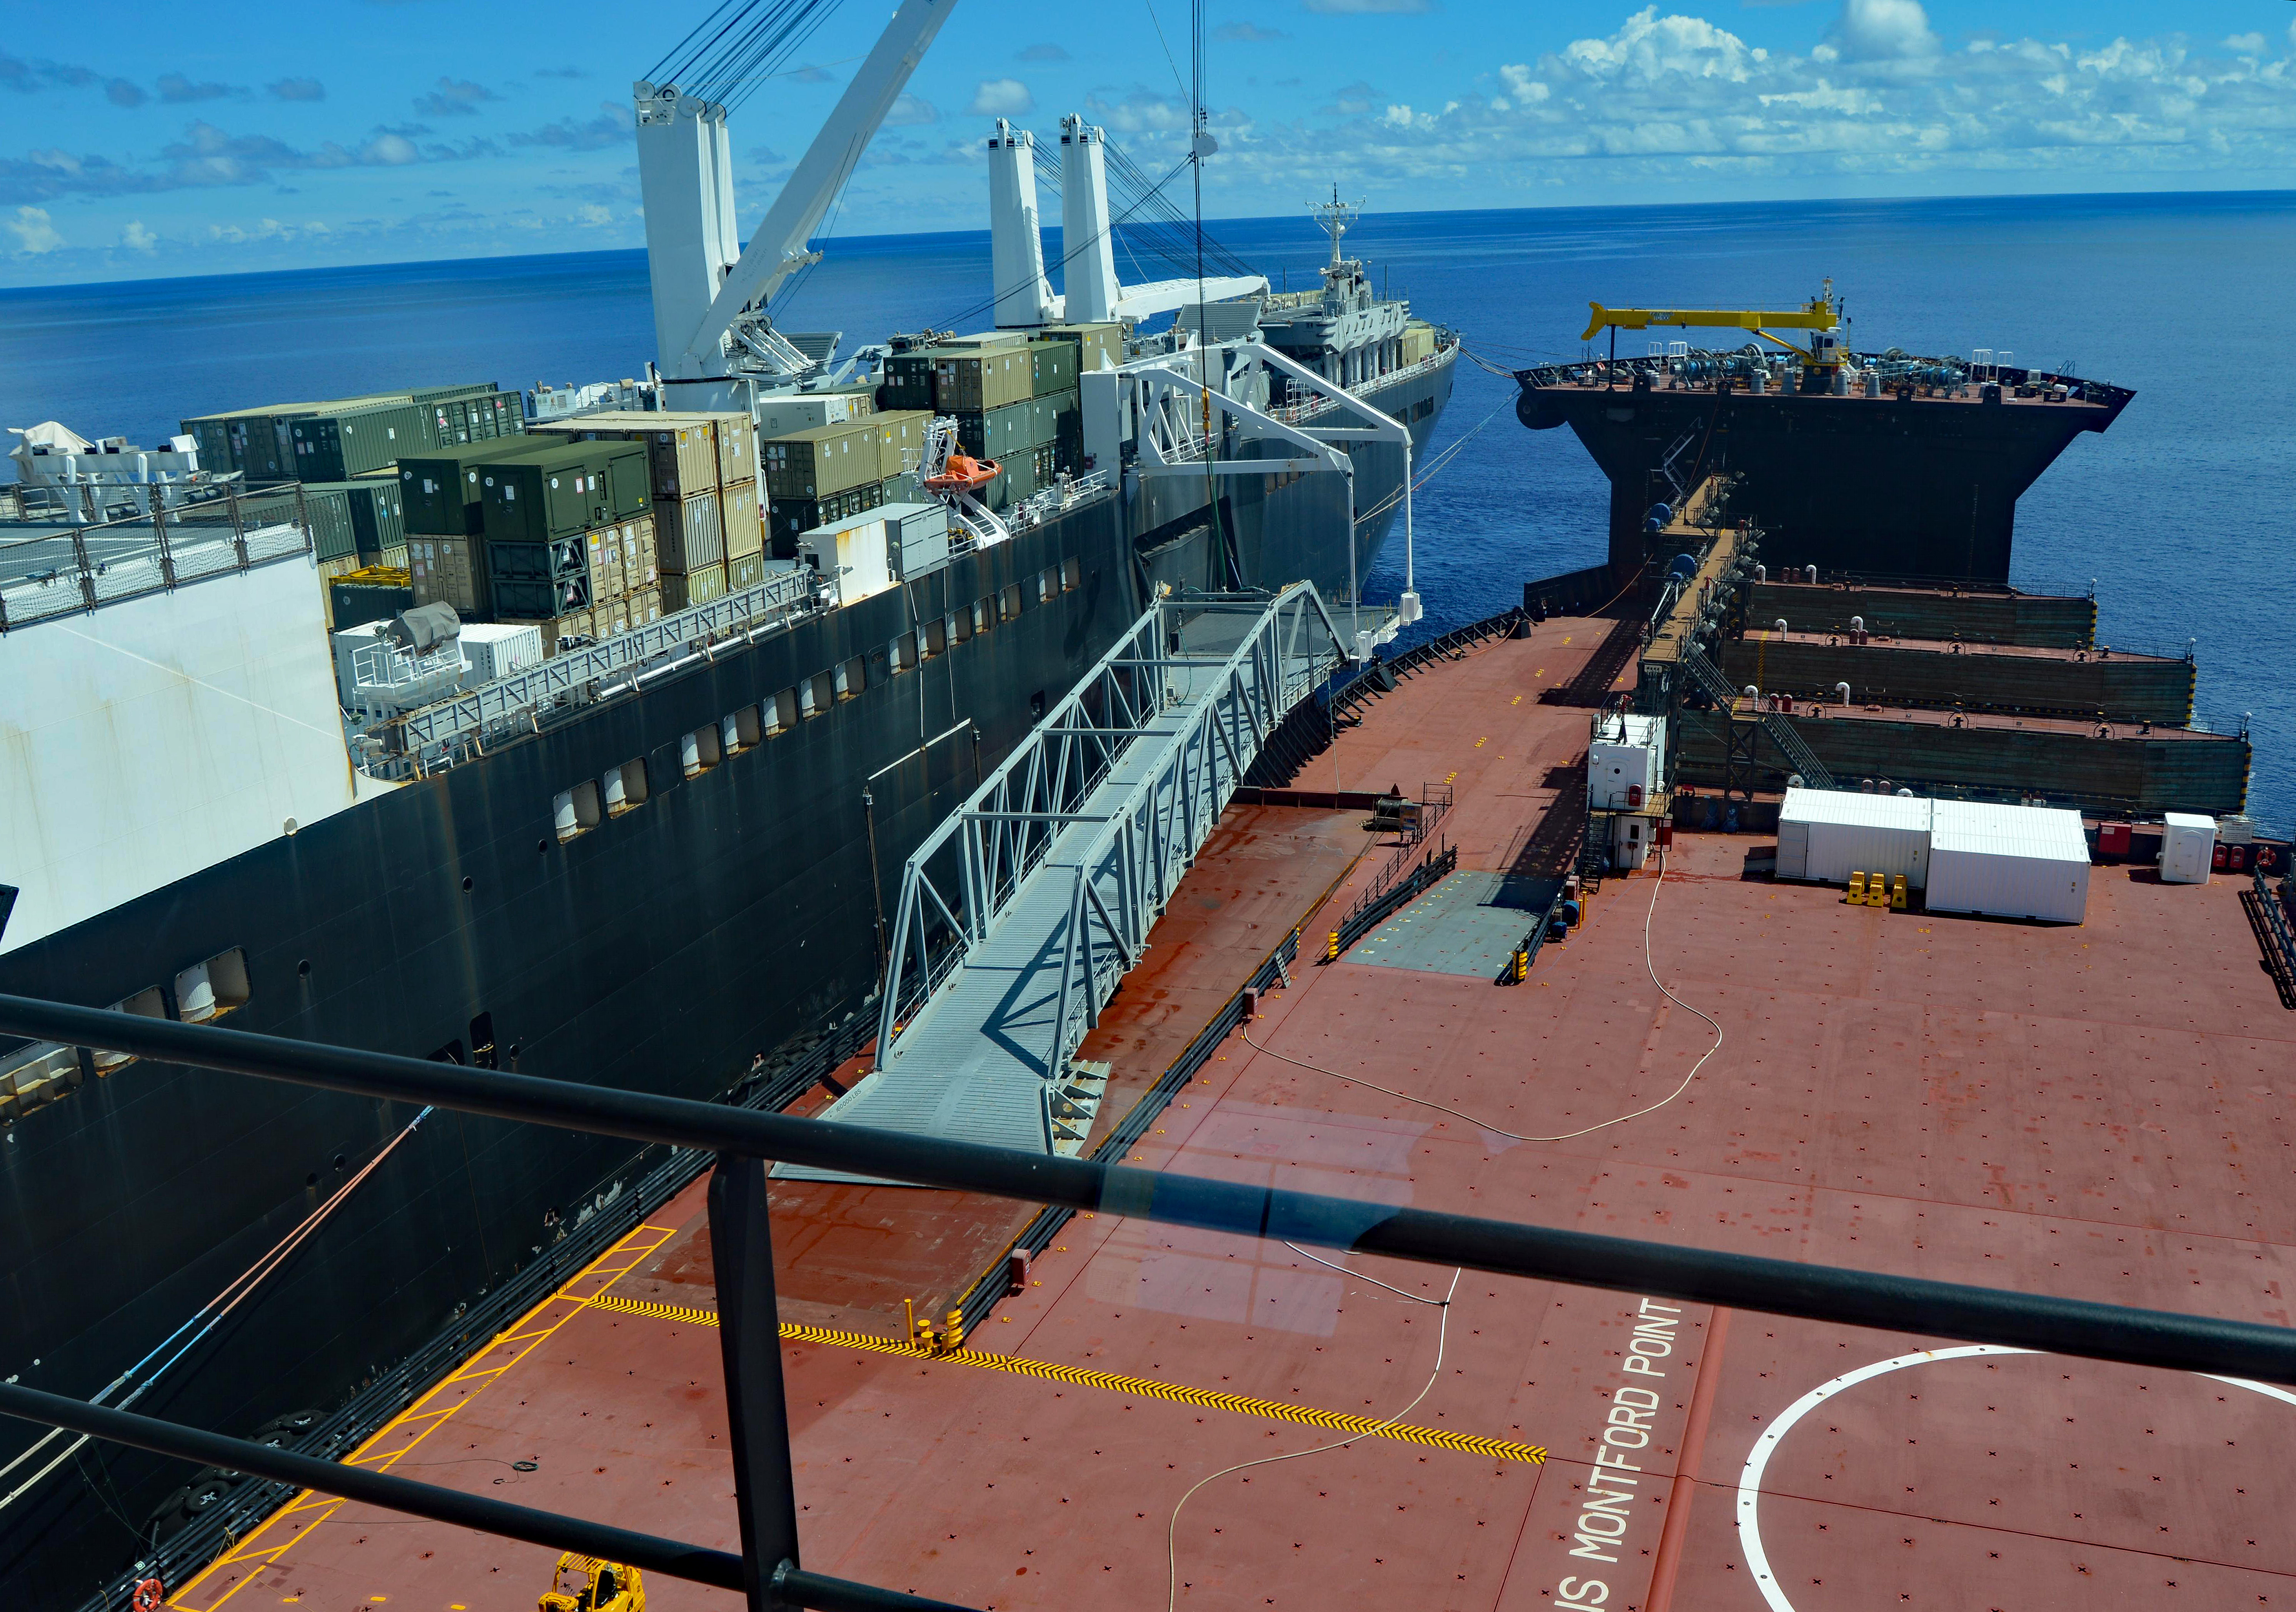 The vehicle transfer ramp connects expeditionary transfer dock USNS Montford Point (T-ESD 1) and maritime prepositioning force ship USNS Dahl (T-AKR 312) during a maneuver to demonstrate MSC’s unique seabasing capabilities on July 21, 2016. US Navy photo.